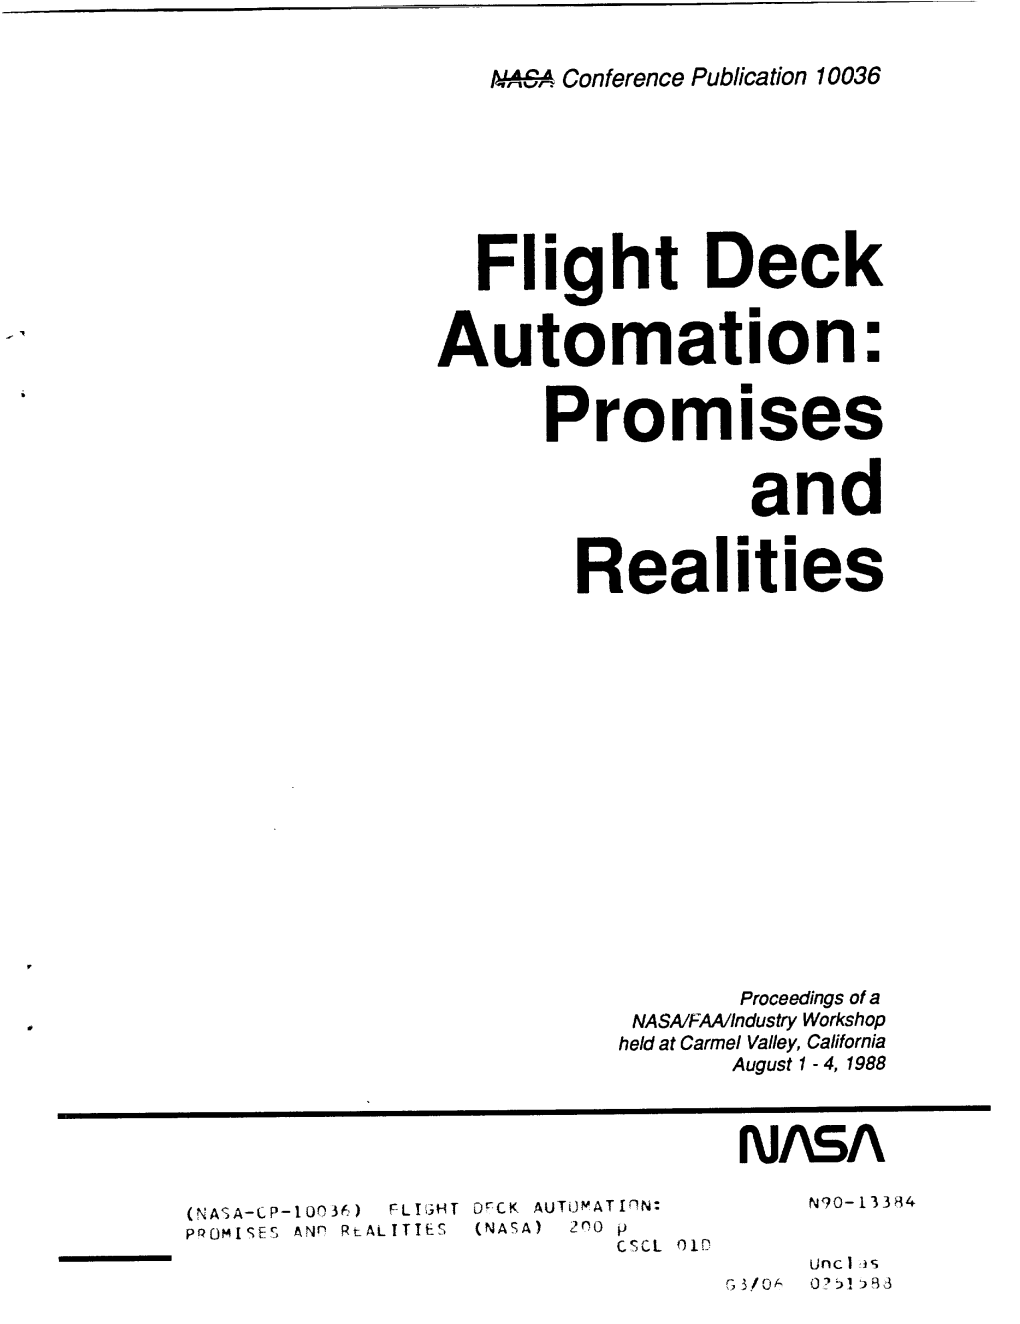 Flight Deck Automation: Promises and Realities